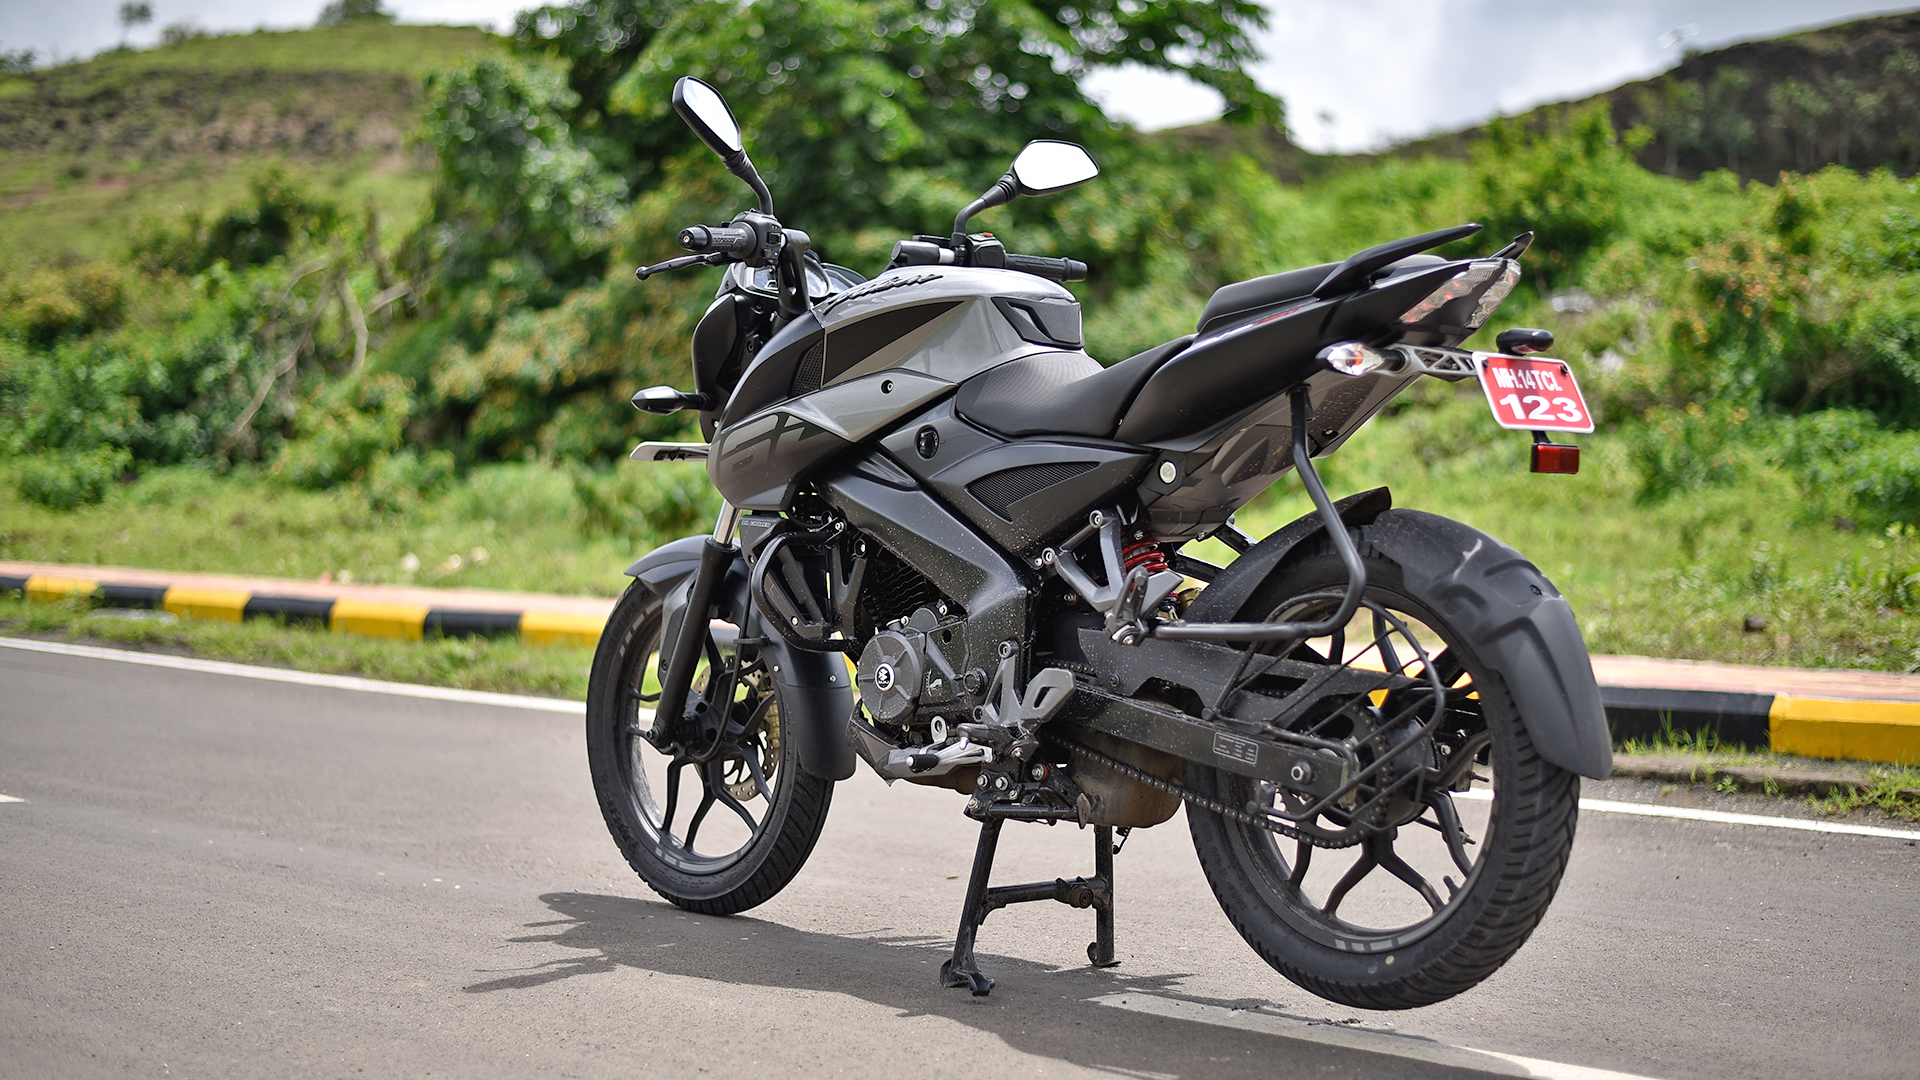 Bajaj Pulsar Ns160 Launched In India